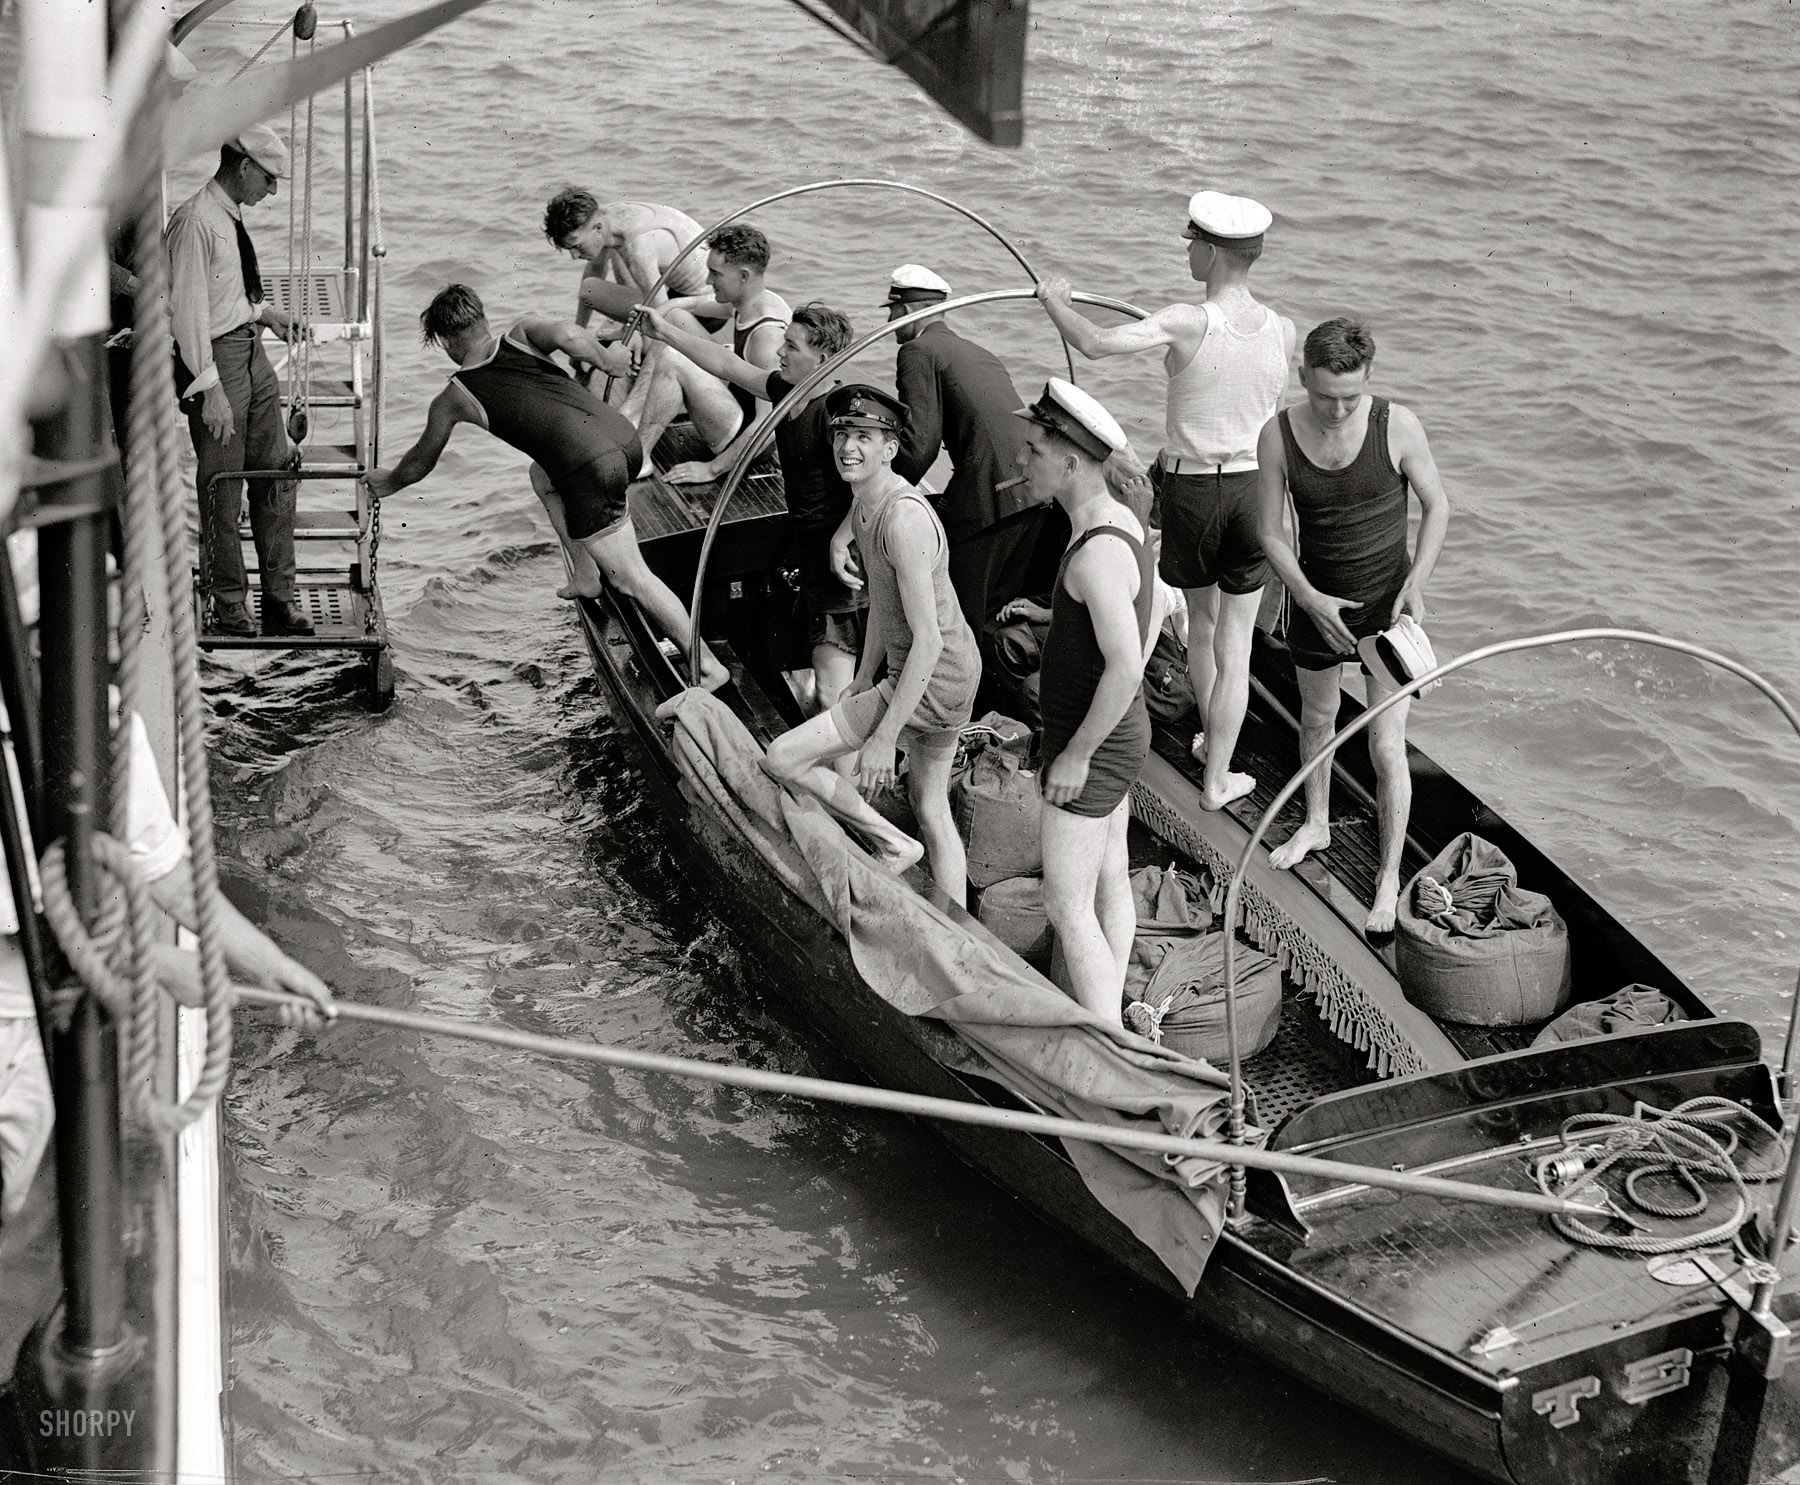 "White House photographers, August 6, 1922." Possibly a recreational outing on the Potomac. National Photo Company Collection glass negative. View full size.